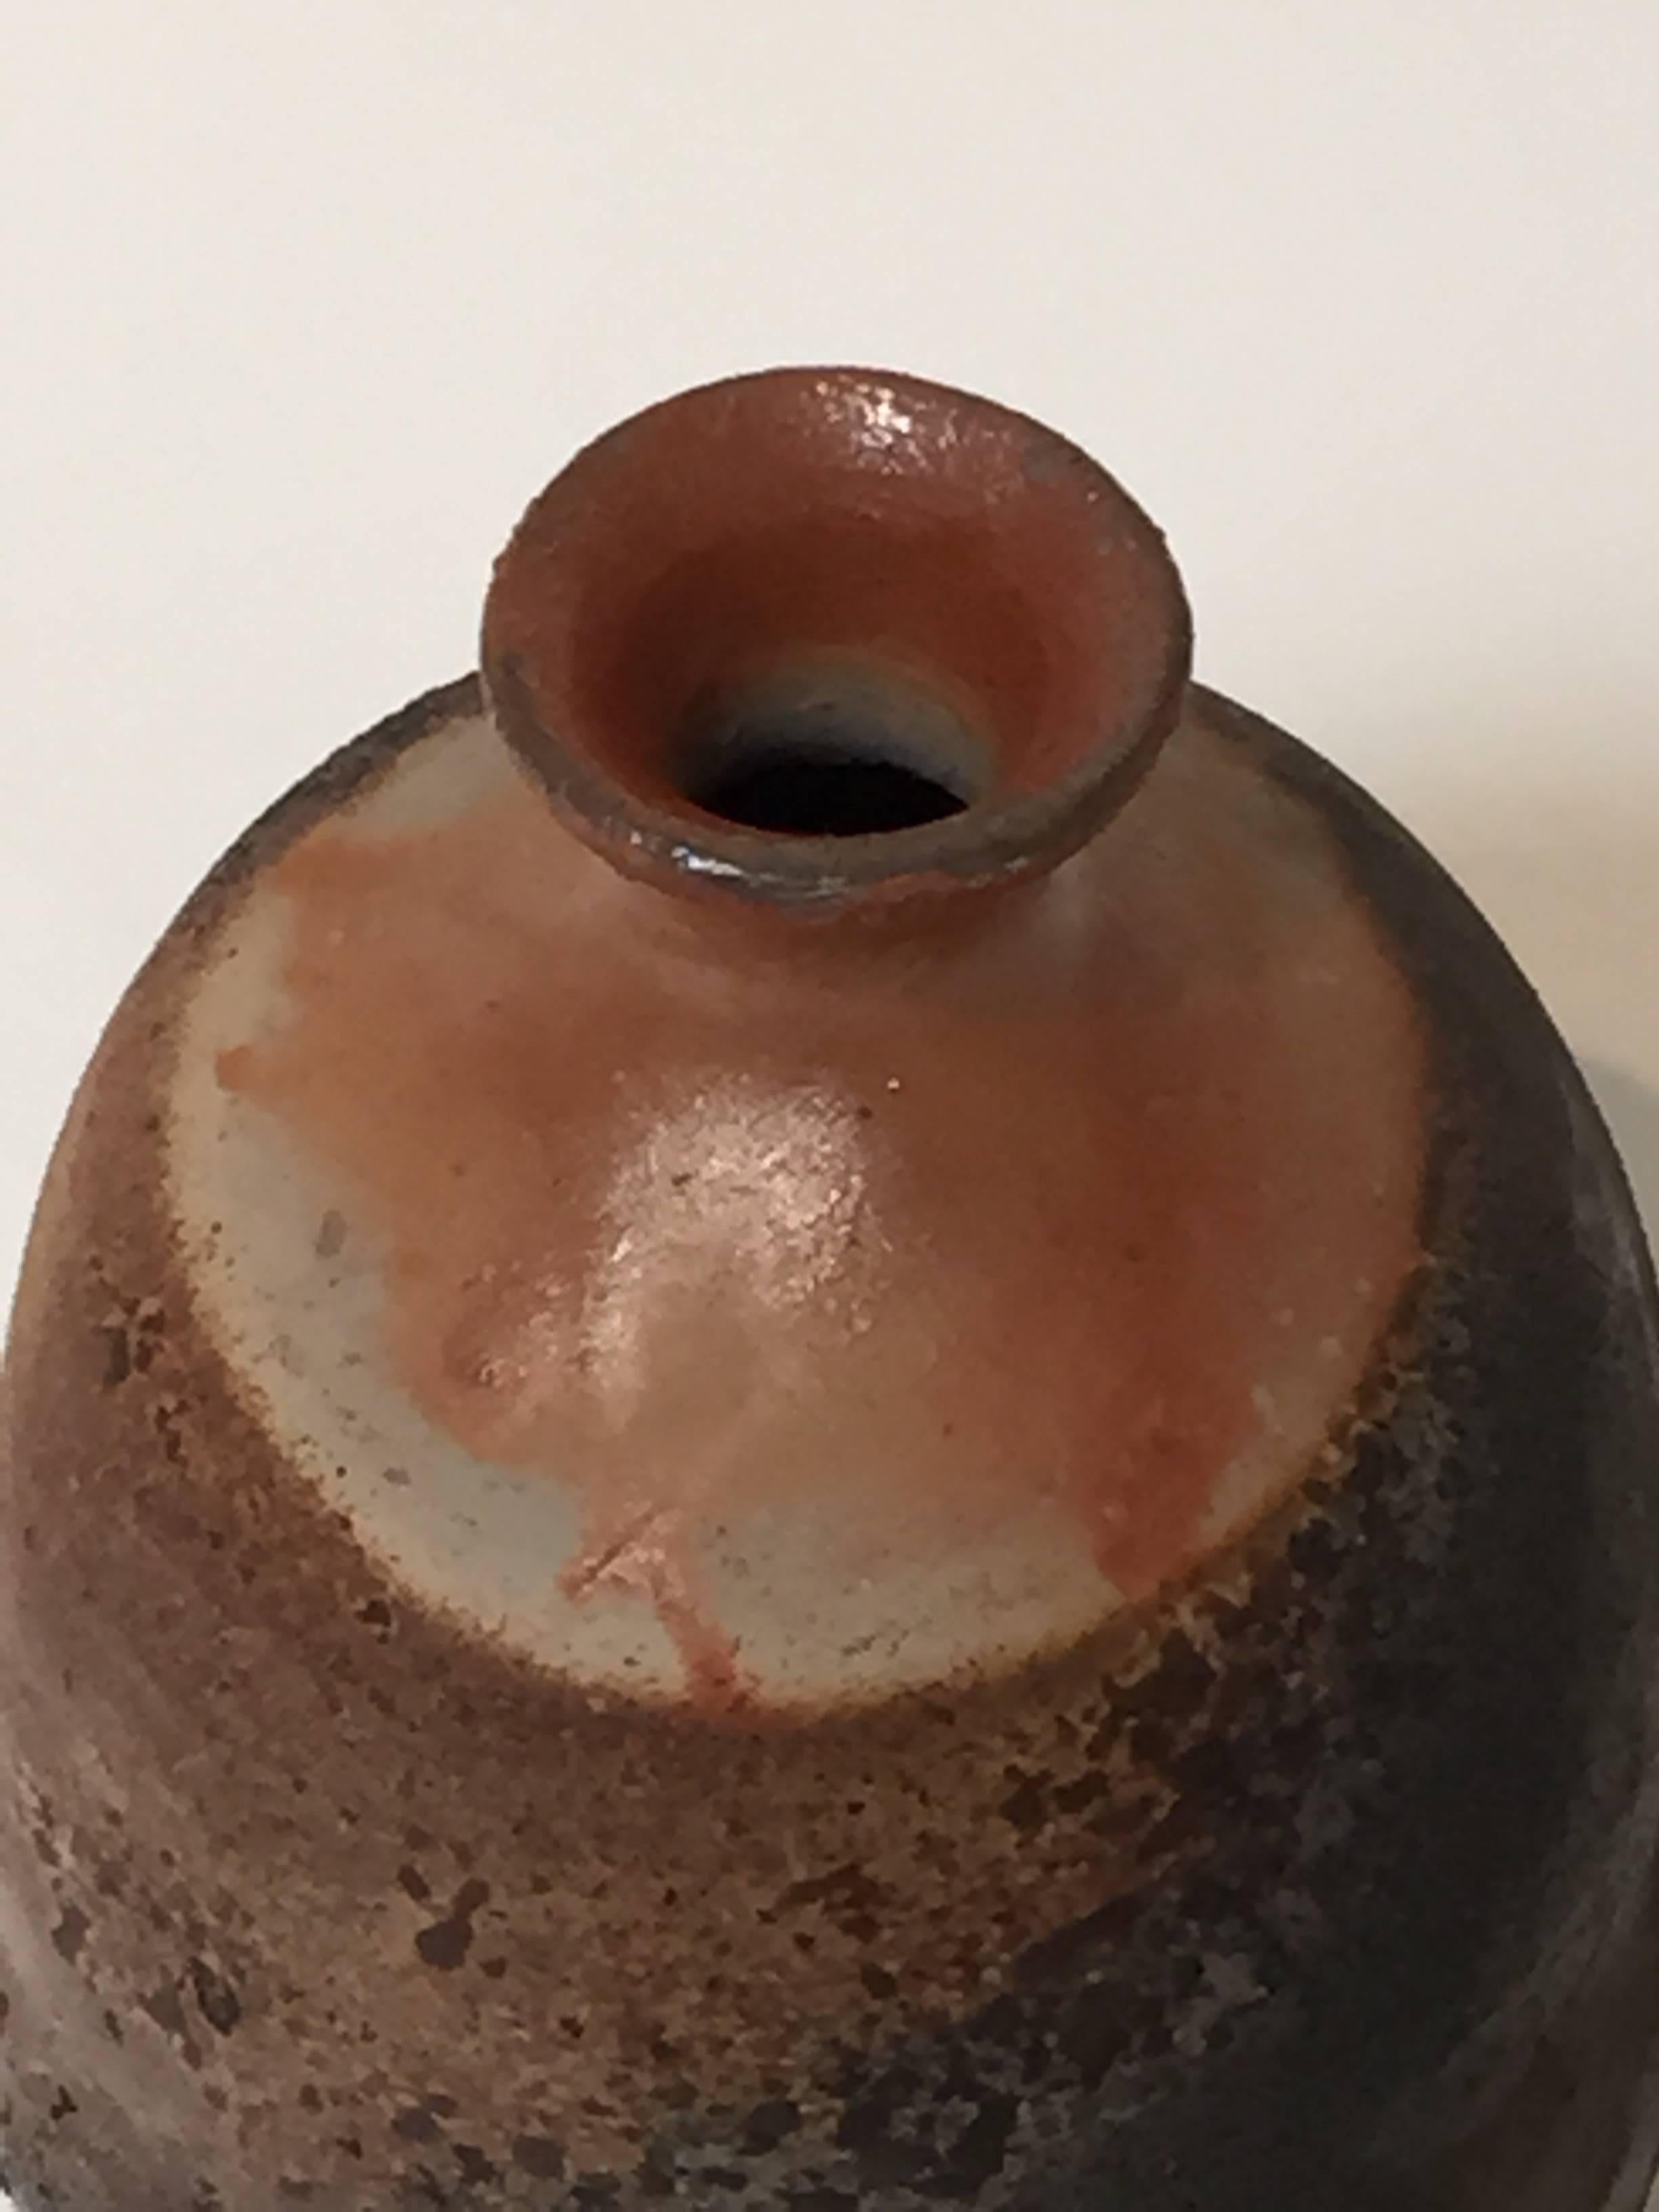 Contemporary Wood Fired Sake Flask by Bizen Potter Hiroyuki Wakimoto In Excellent Condition For Sale In Los Angeles, CA